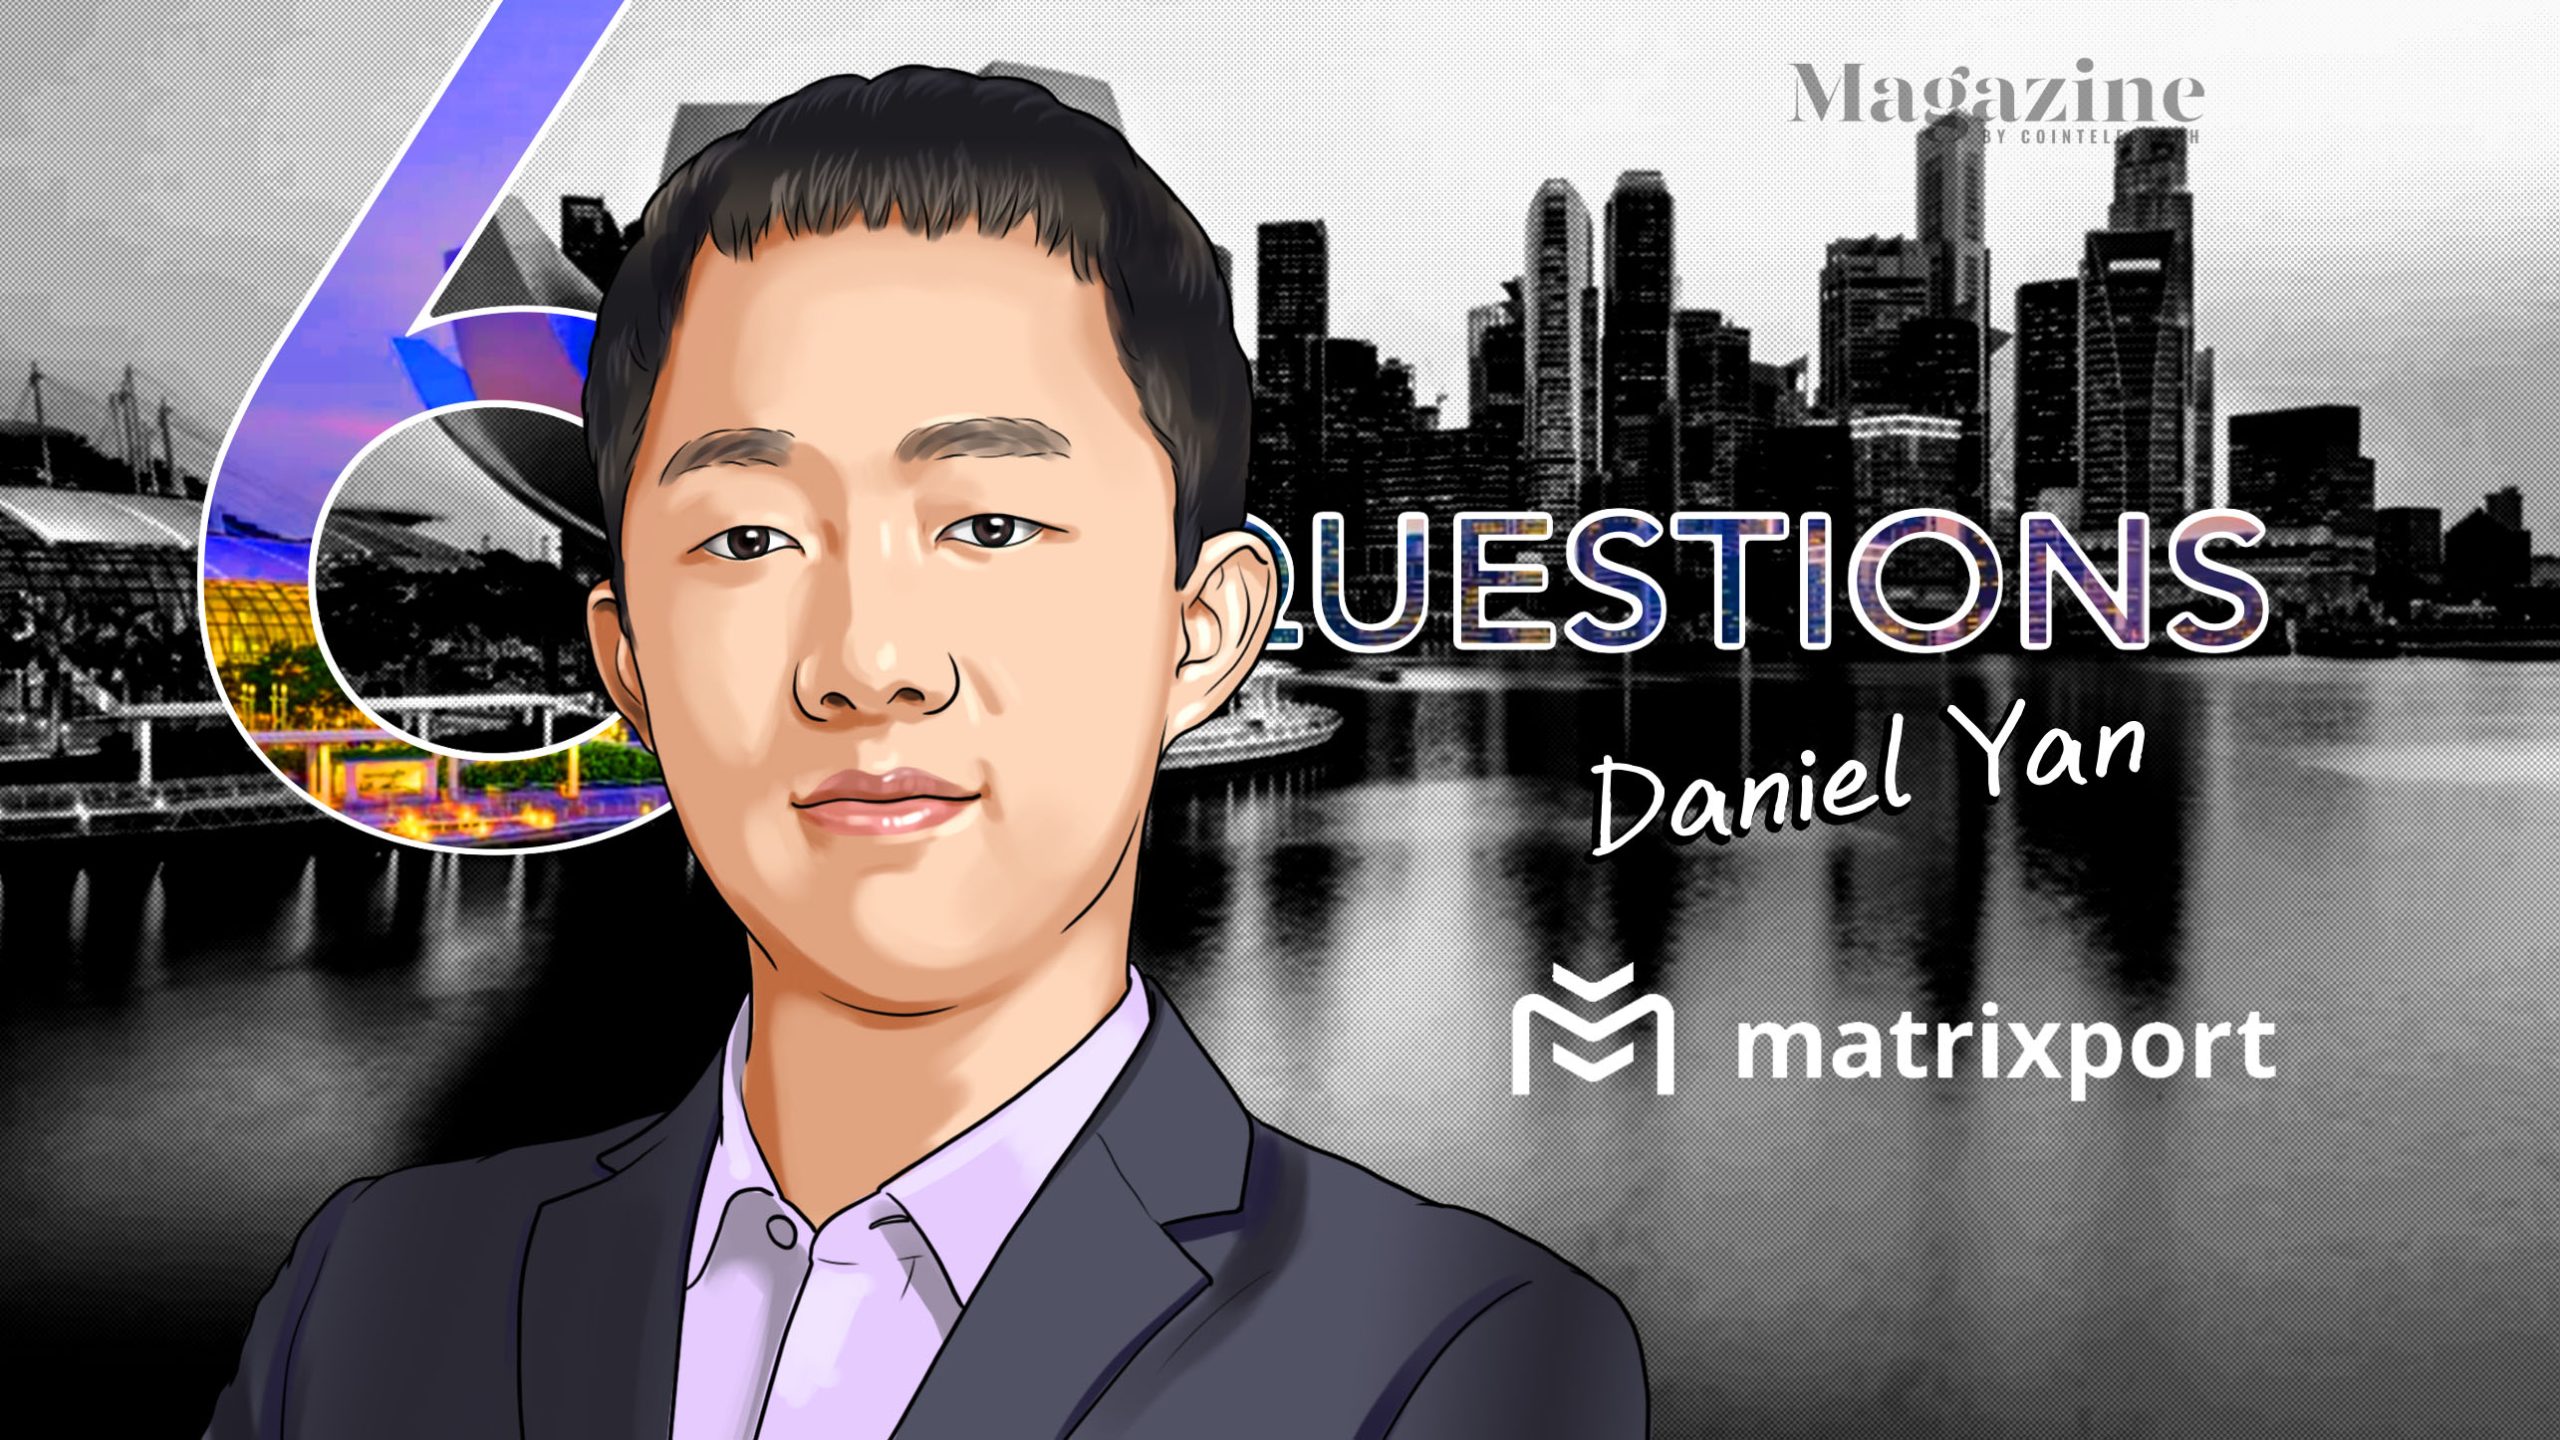 You are currently viewing 6 Questions for Daniel Yan of Matrixport – Cointelegraph Magazine